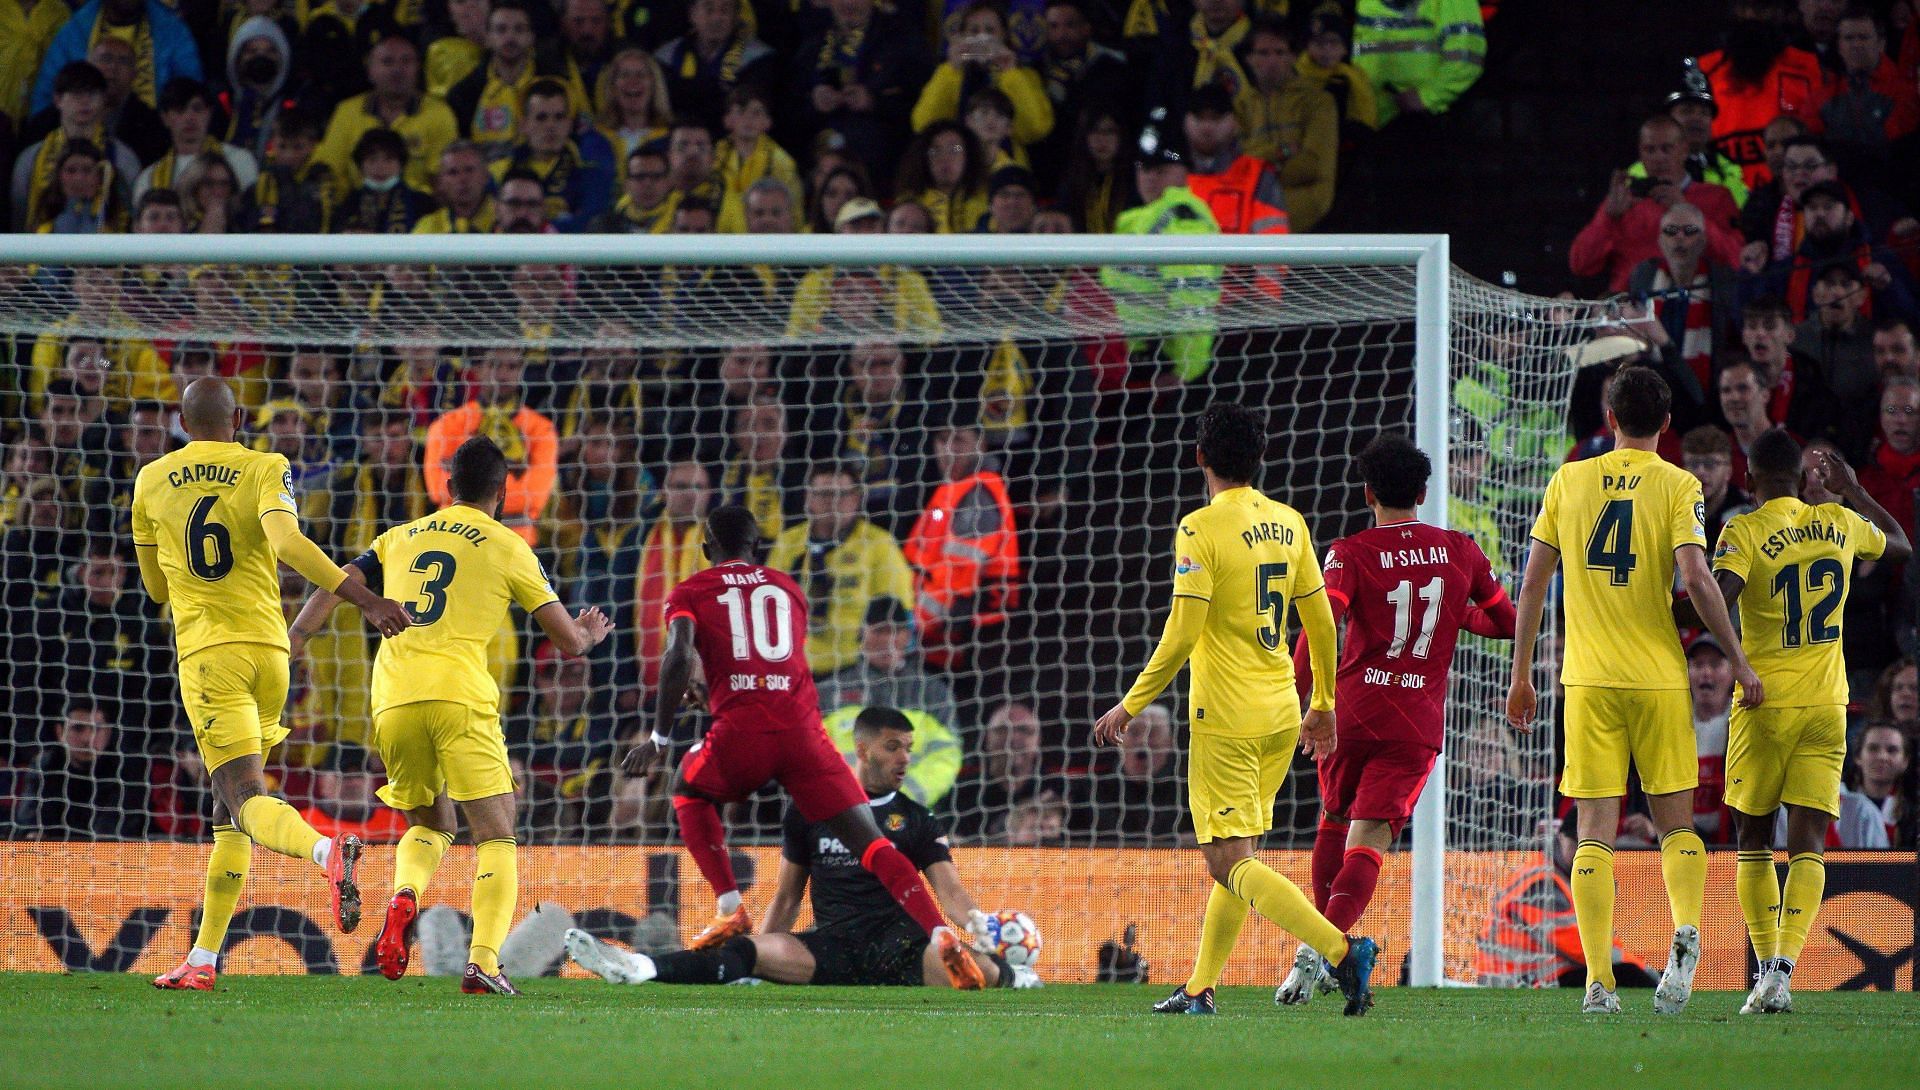 Liverpool defeated Villarreal 2-0 in the first of their Champions League semi-final first leg